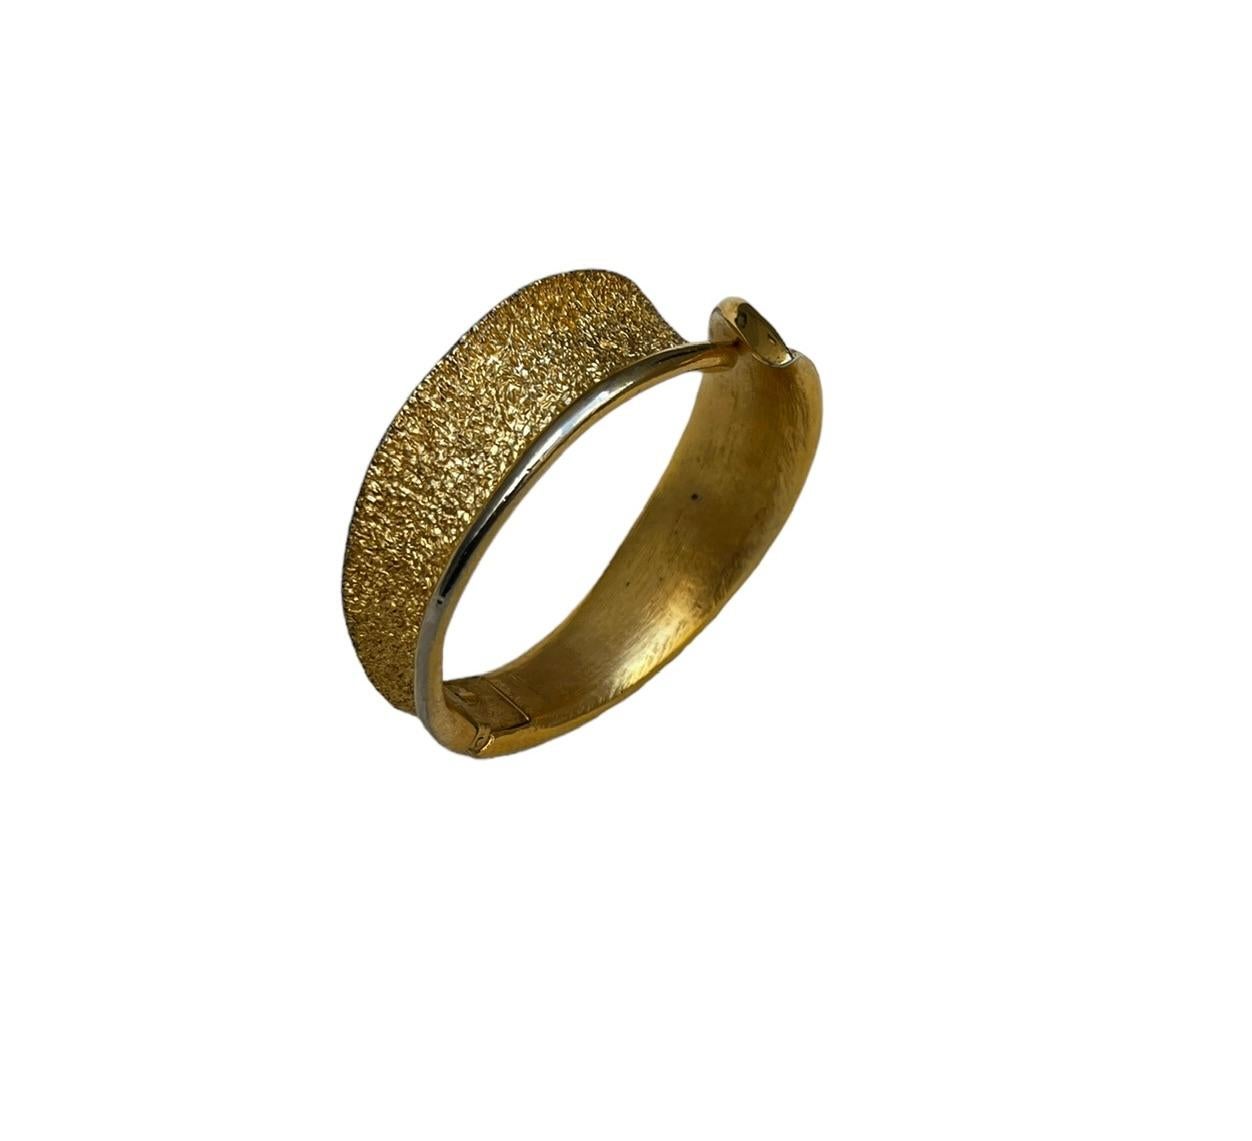 Crown Trifari Gold Clamper Bracelet, Circa 1950s In Good Condition For Sale In Brooklyn, NY